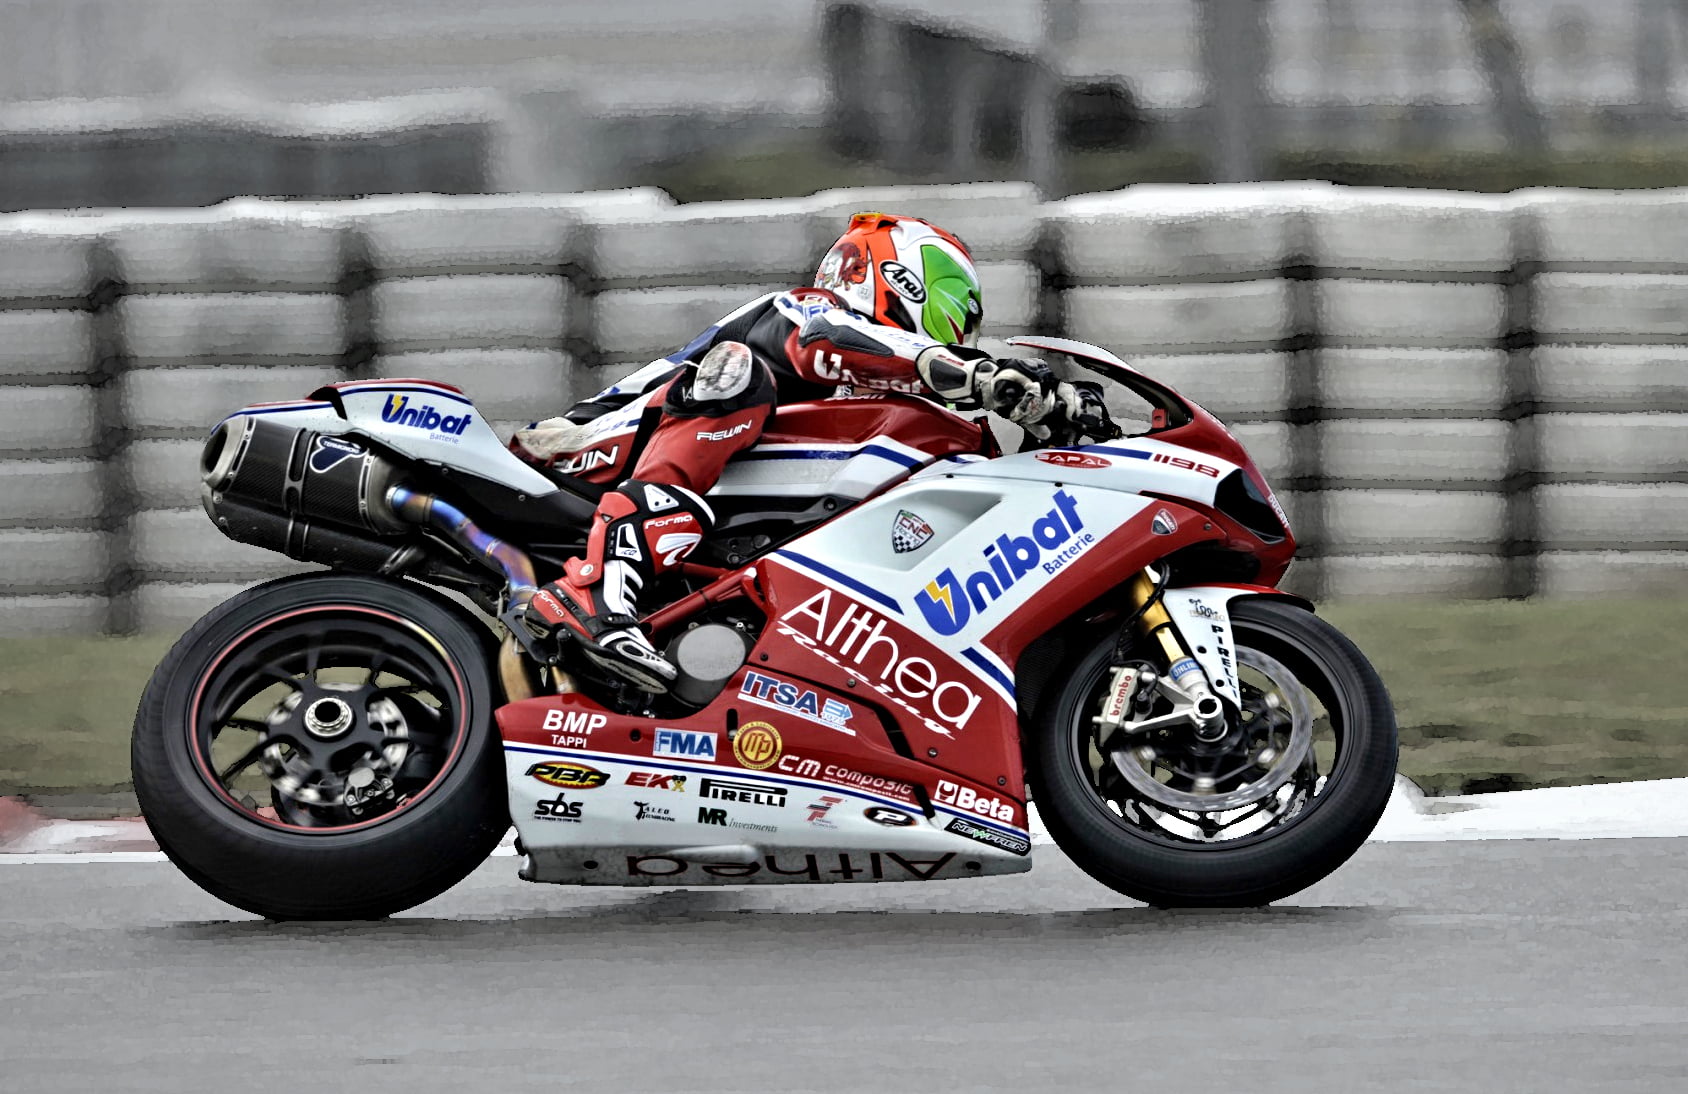 man in racer suit riding on red and white sports bike, DUCATI